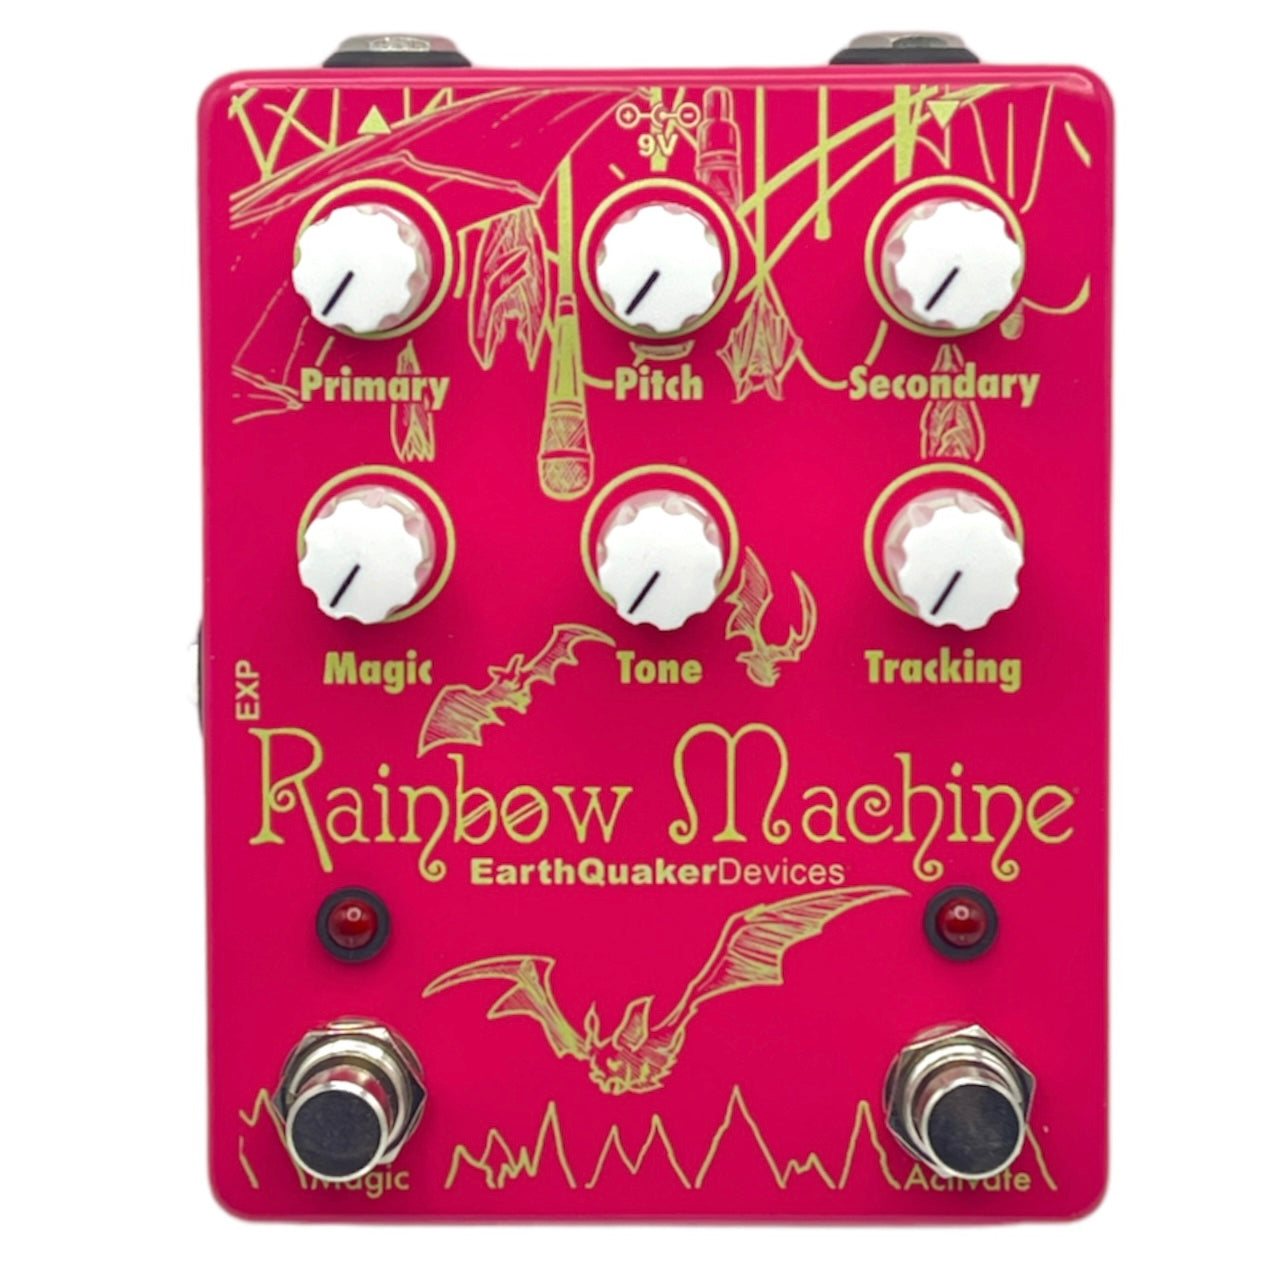 ROCK HALL X EARTHQUAKER DEVICES - LIMITED EDITION TELEMAGENTA RAINBOW MACHINE POLYPHONIC PITCH MESMERIZER PEDAL